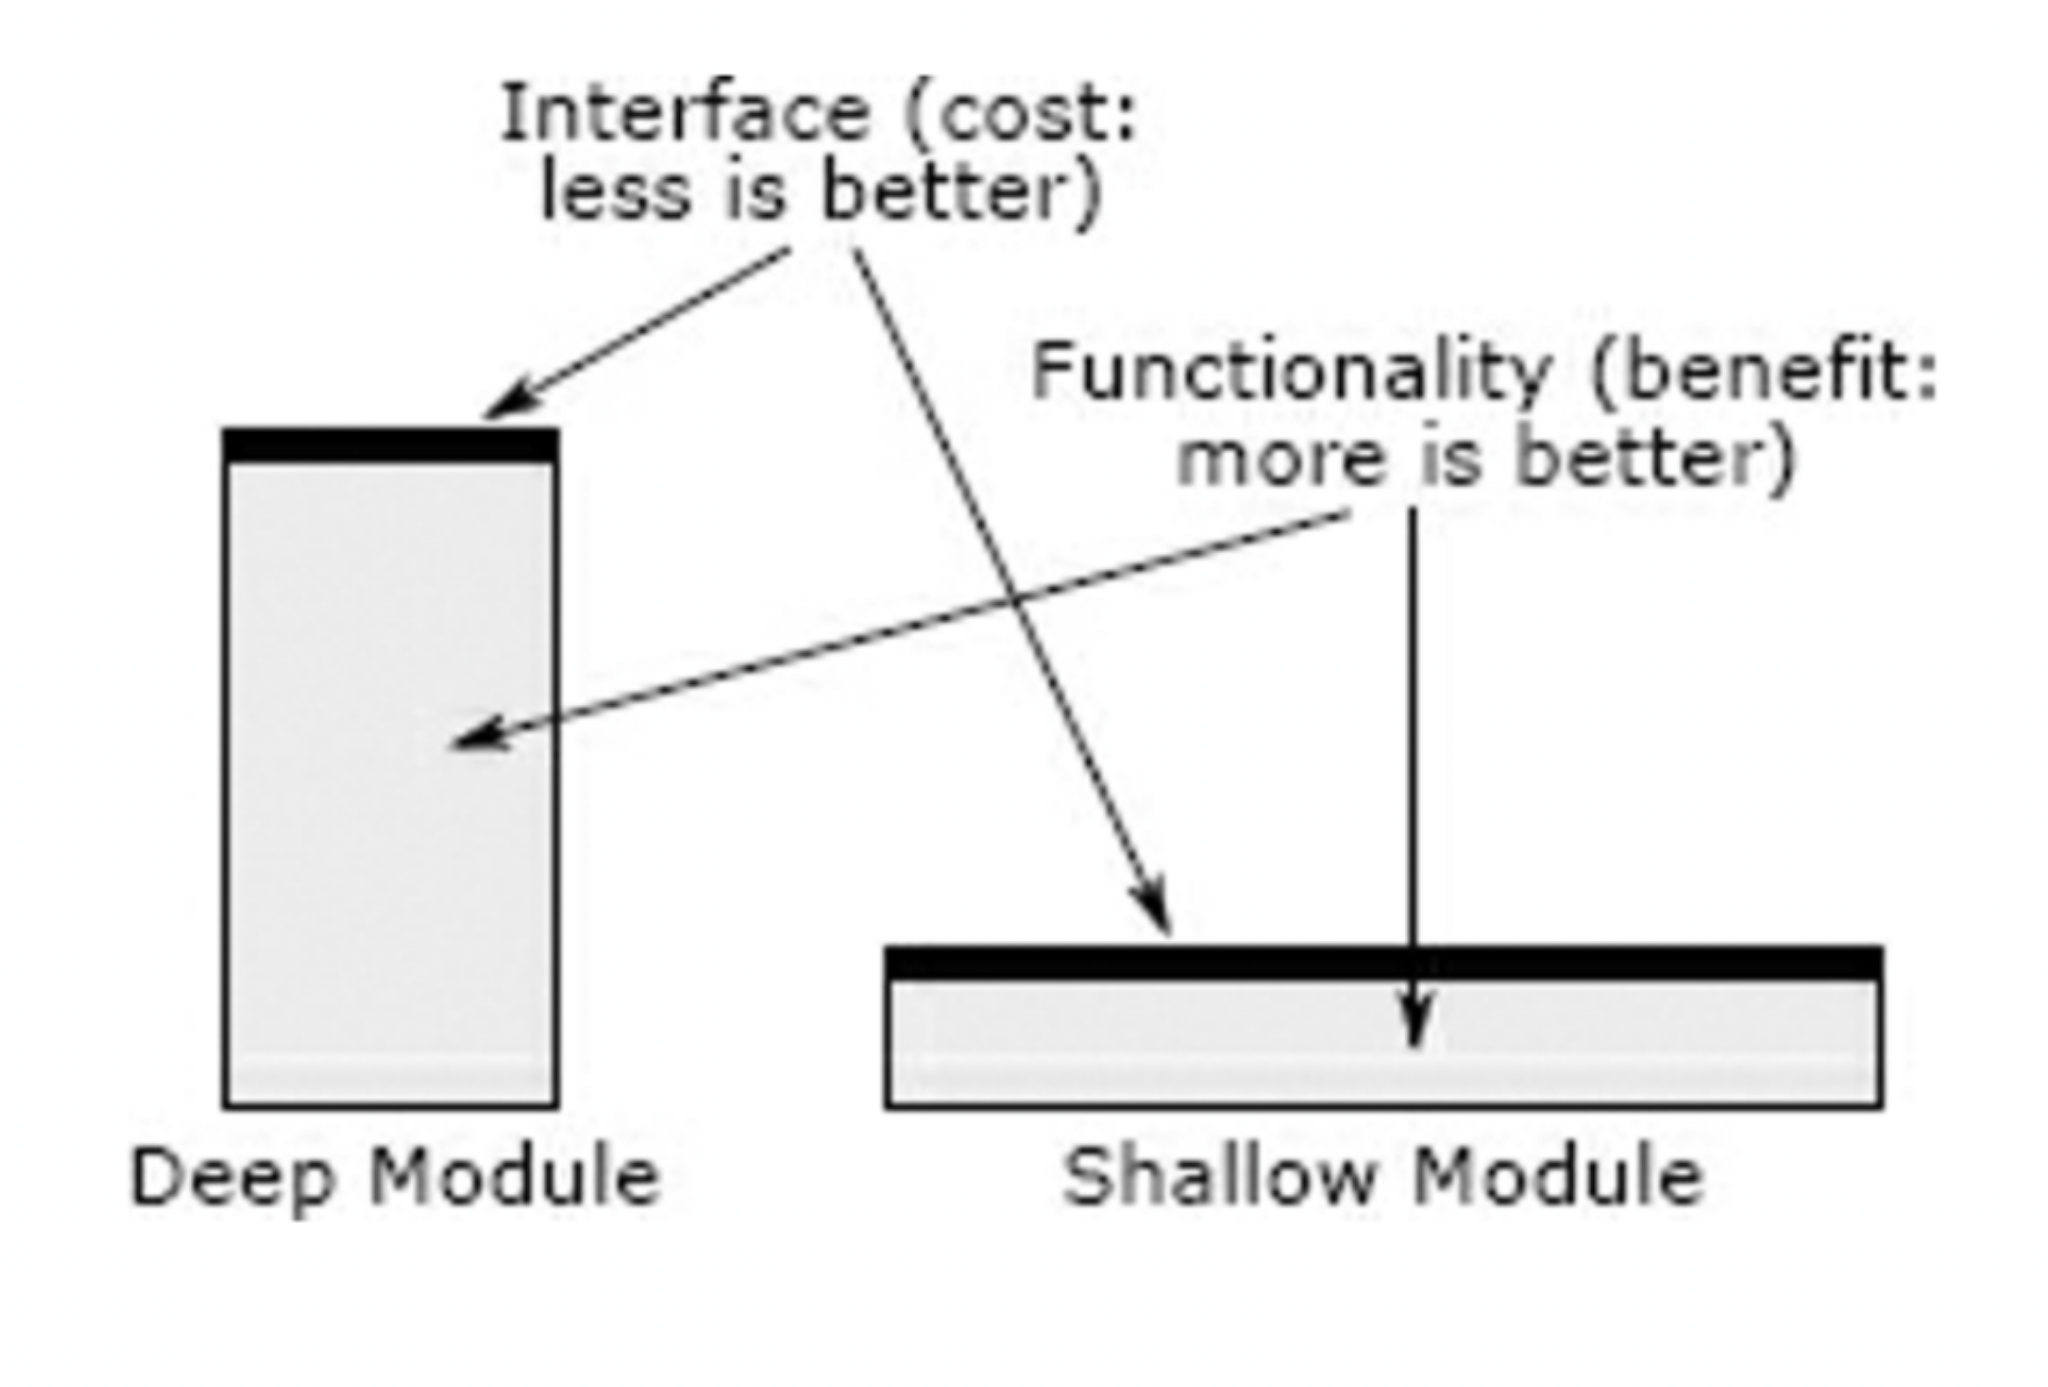 Deep and shallow modules